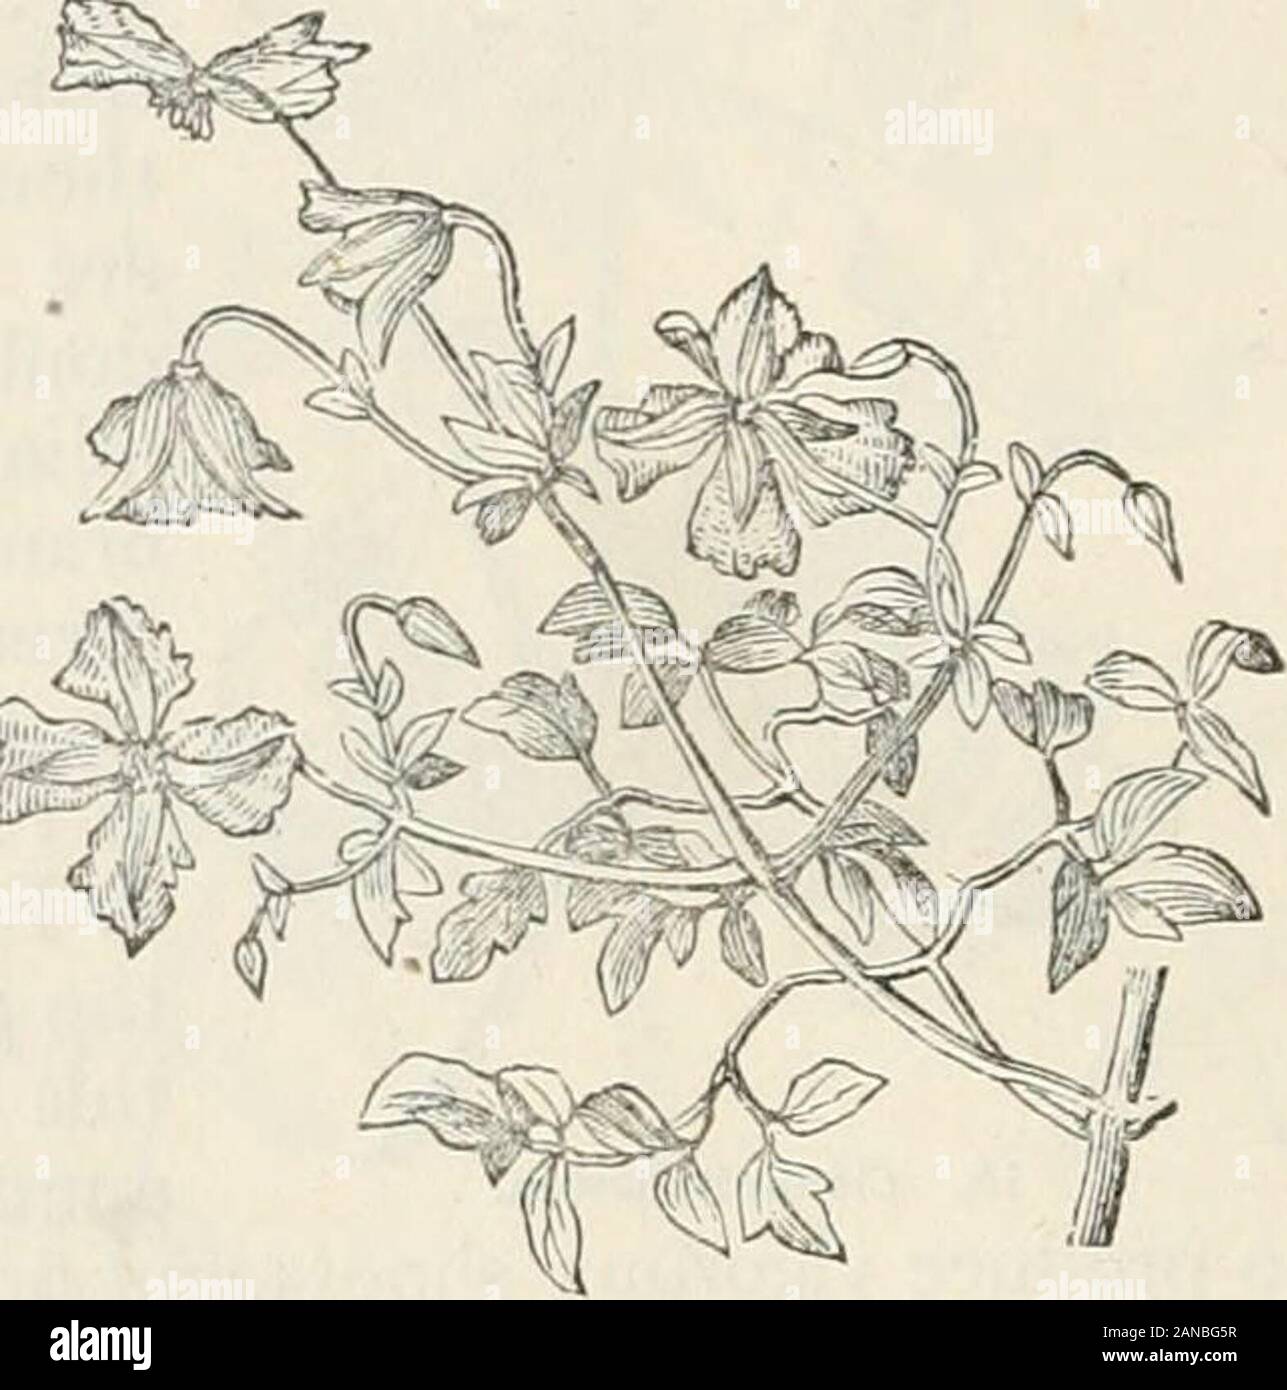 Trees and shrubs; an abridgment of the Arboretum et fruticetum britannicum: containing the hardy trees and shrubs of Britain, native and foreign, scientifically and popularly described; with their propagation, culture and uses and engravings of nearly all the species . ea. — Flowers purple. i C. r. 3 multiplex G. Don. C. pulchella Pers. — Flowers double, blue. This variety produces more robust, more extended, and fewer shoots, than the single-flowered blue or purple varieties.1 C. V. 4 tenuifolia Dec, C. tenuifolia lusitanica Tourn.; and1 C. r. 5 baccdta Dec, C. campaniflora Hort.; are varieti Stock Photo